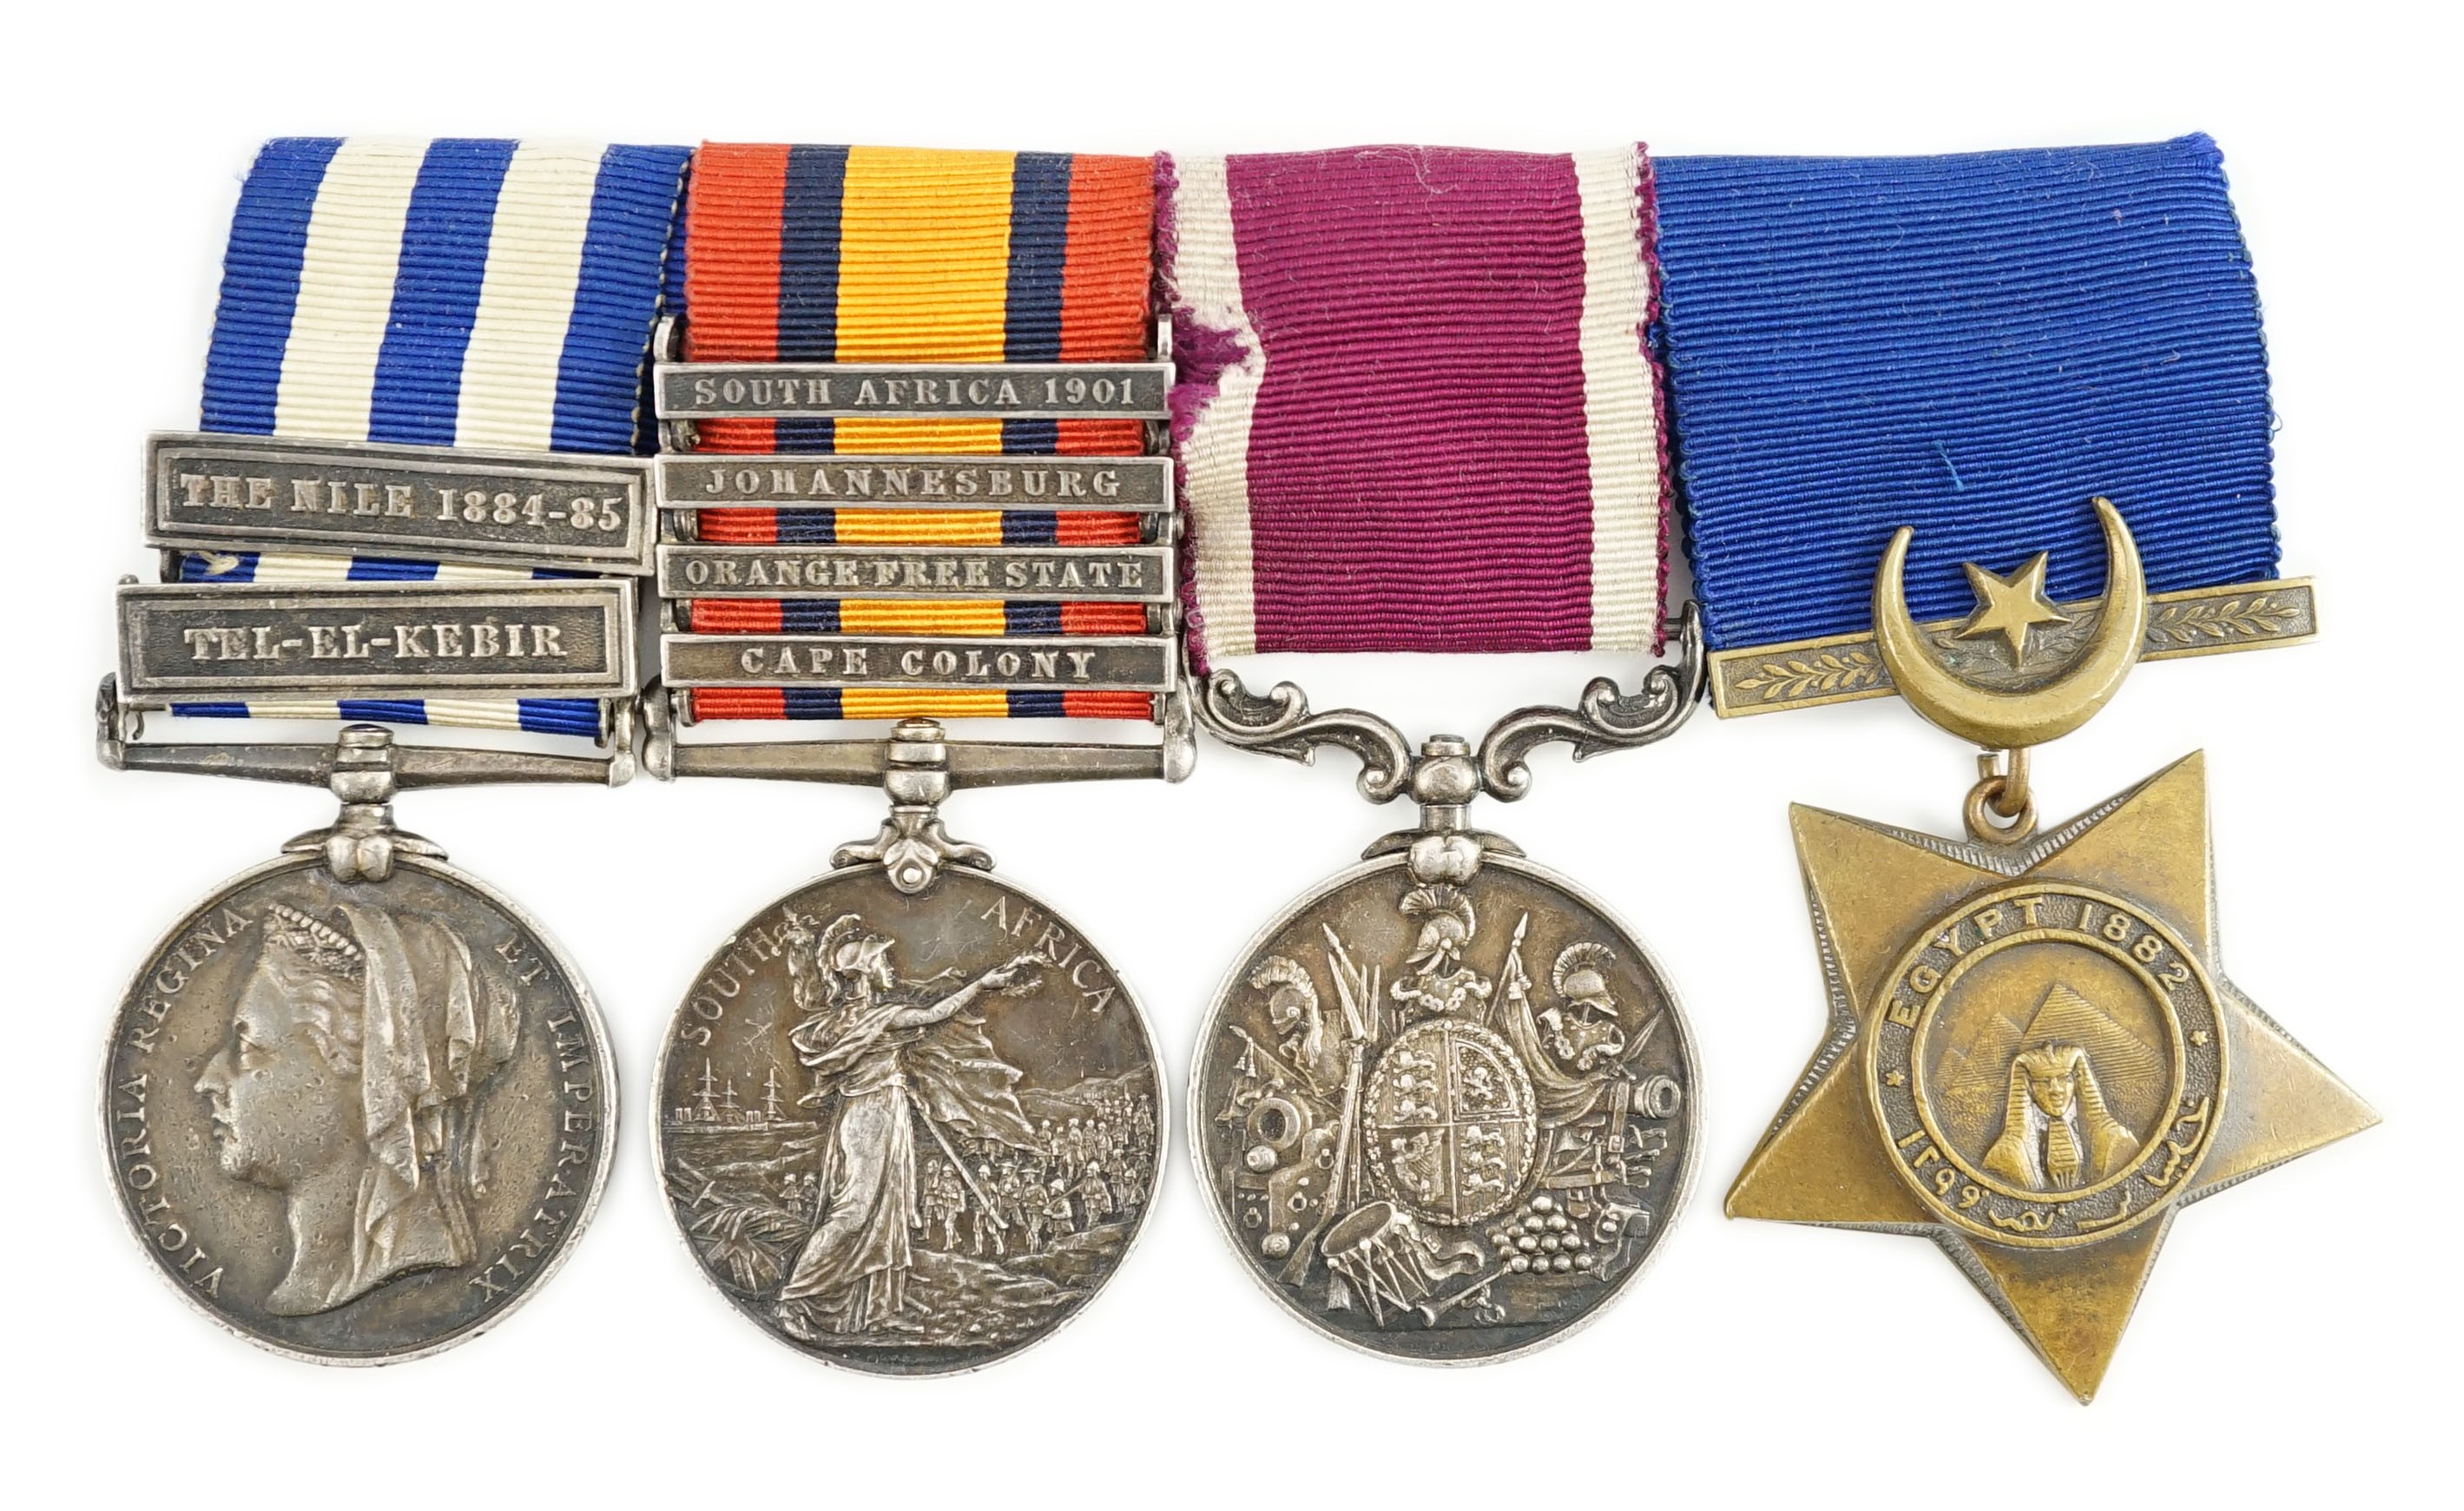 A Victorian Egypt / South Africa campaigns group of medals to 16739 Sergt. F.J. Allan, Royal Engineers